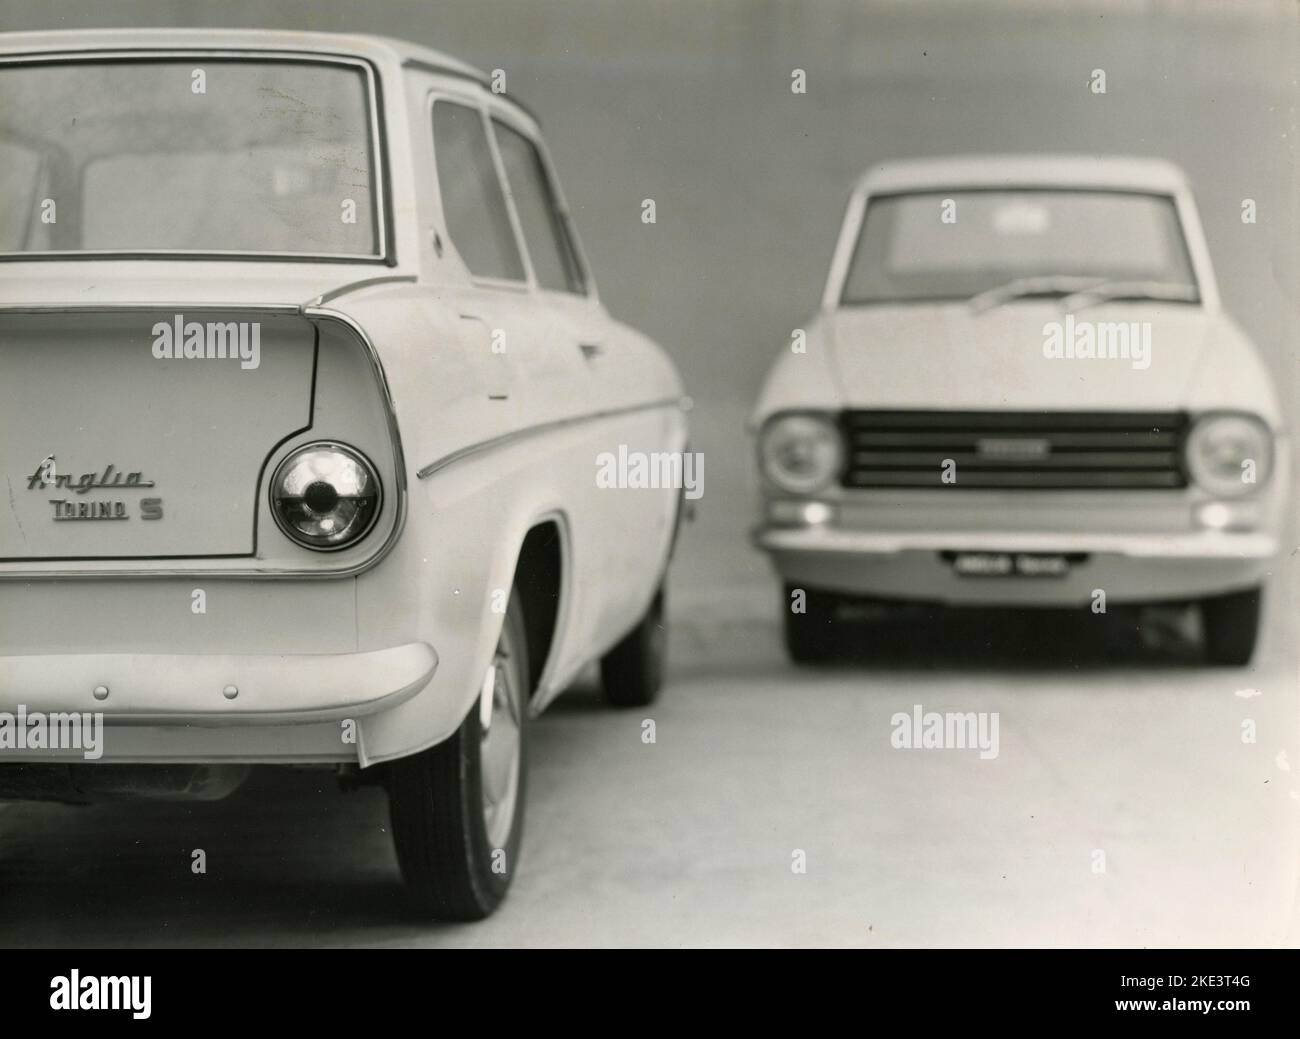 Ford Anglia Torino S car, Royaume-Uni 1967 Banque D'Images